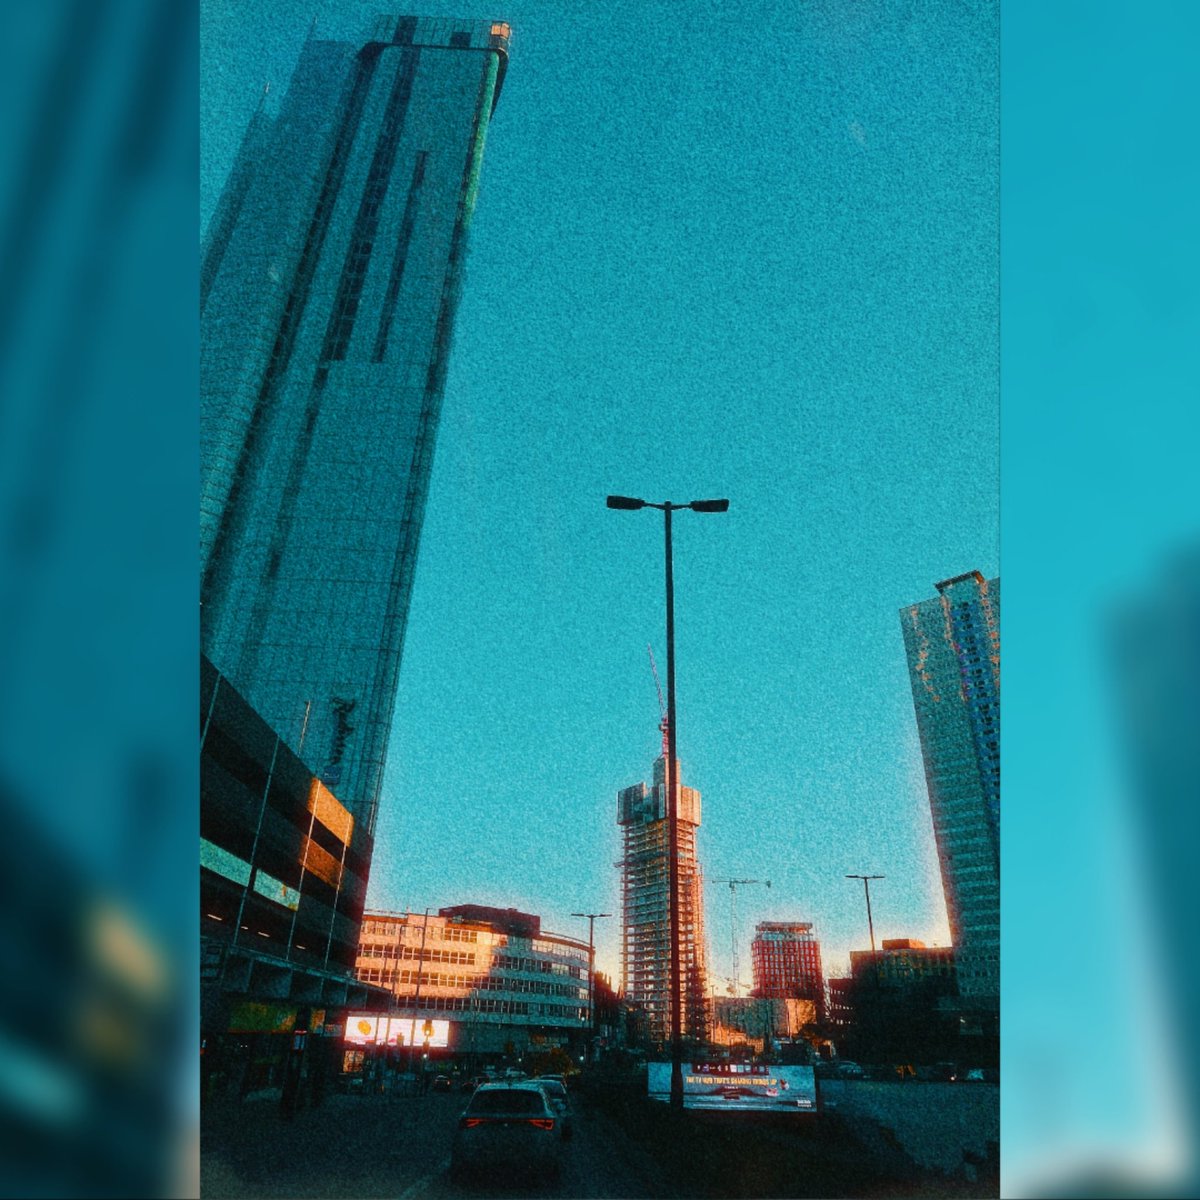 Everything Bluuuwuuopp in central birmz😎🌃📍

#streetphotography #streetpic #car #landscapephotography #birmingham #brum #0121 #outsidephotography #expensive #class #classy